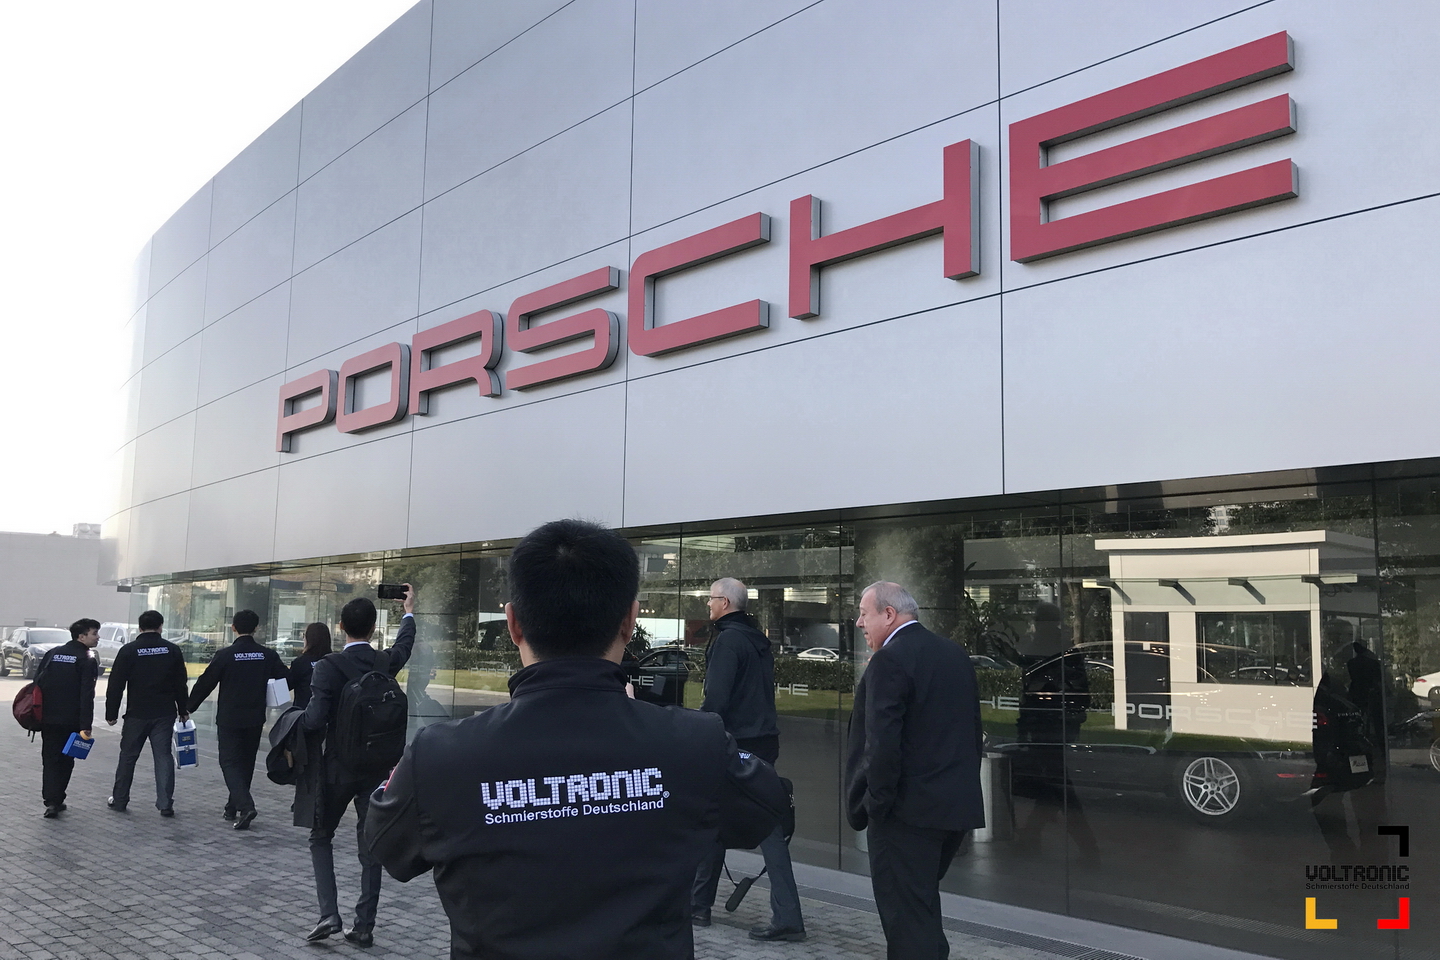 VOLTRONIC conduct training at Porsche Group